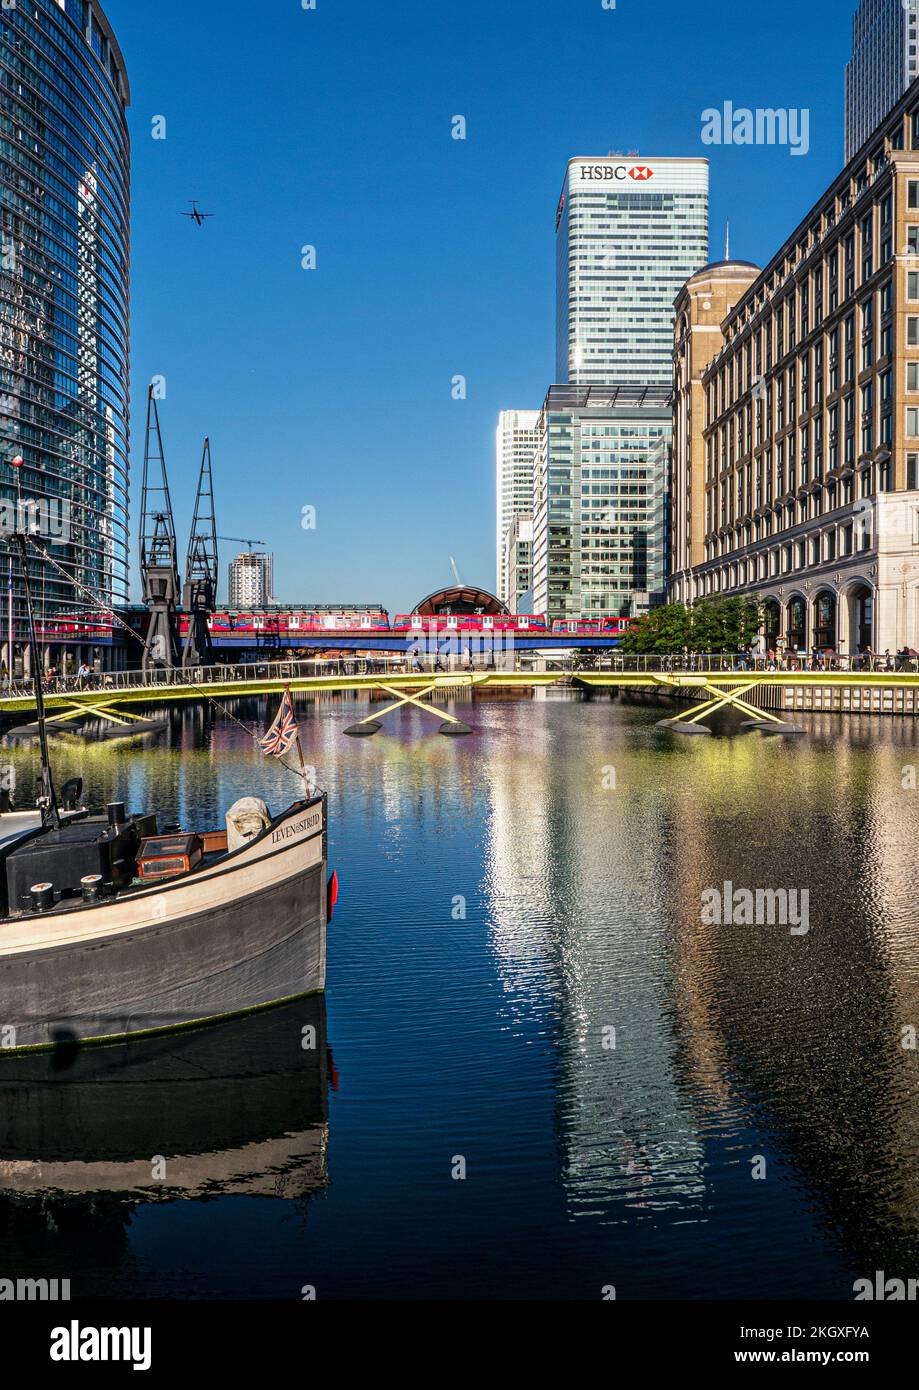 Canary Wharf at West India Docks with barge in foreground & HSBC building. West India Quay DLR Crossrail tube rail station behind London E14 Stock Photo